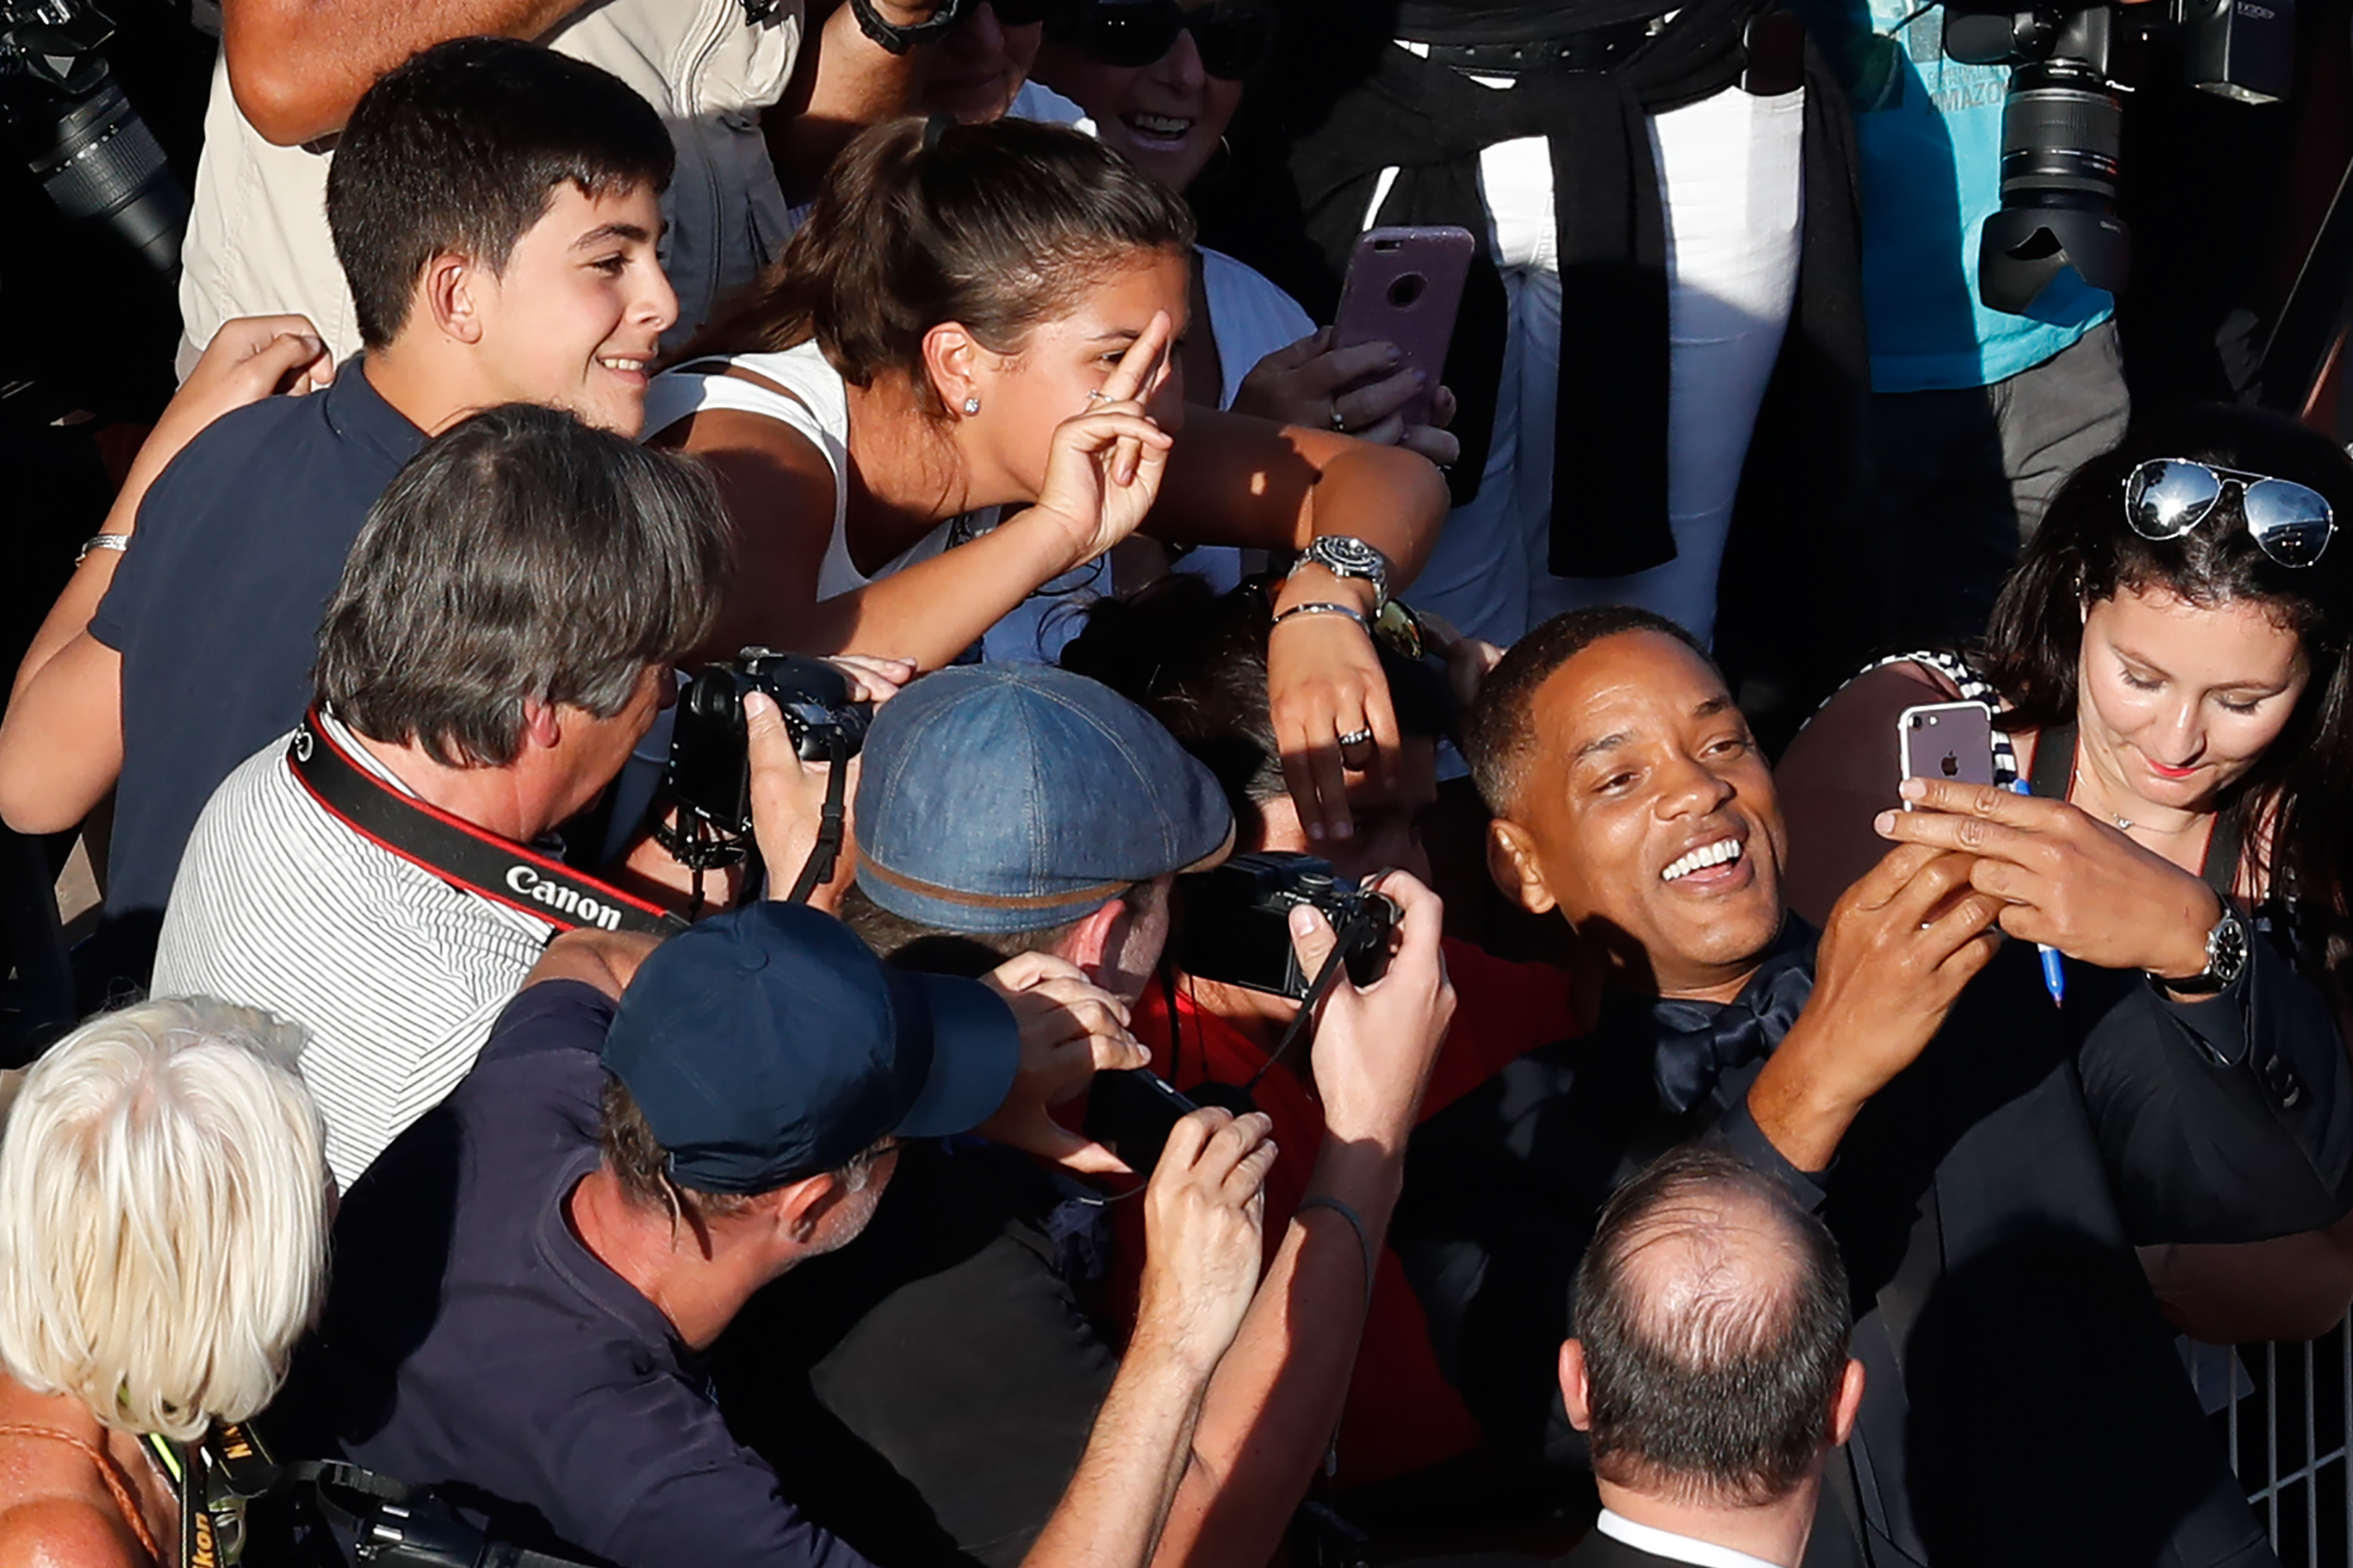 Will Smith taking selfies with fans at the Cannes Film Festival in 2017 | Source: Getty Images